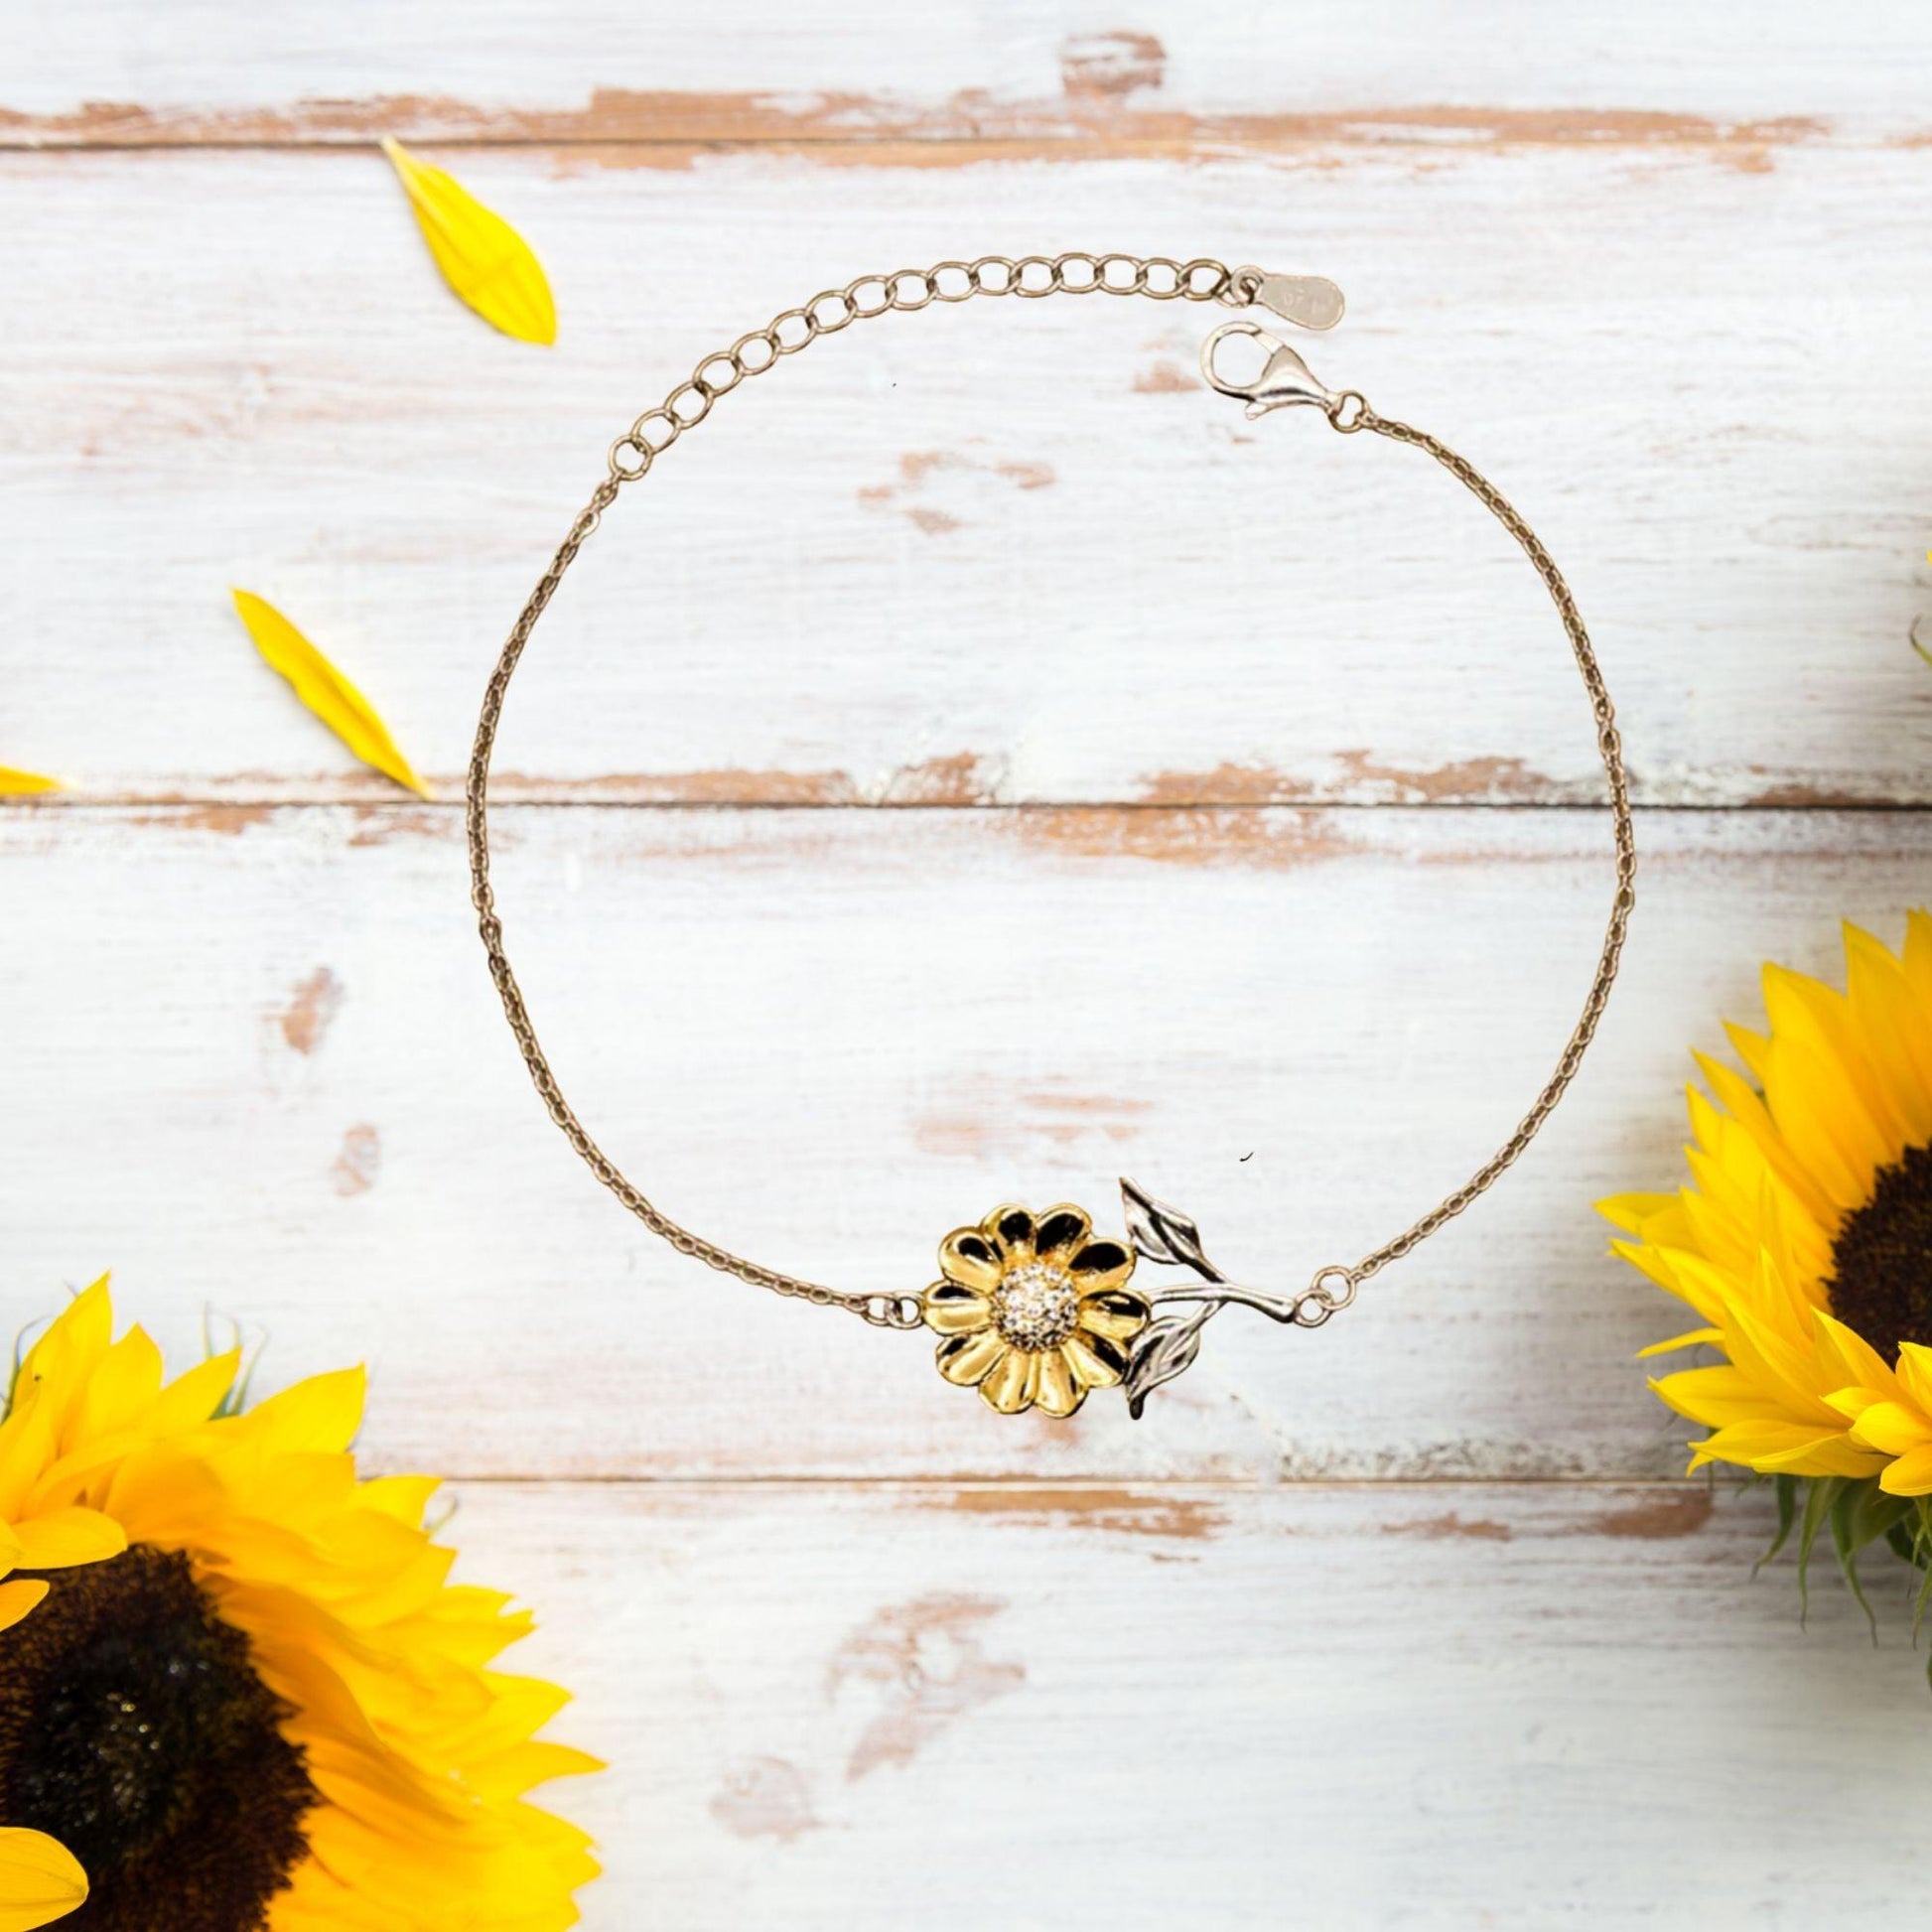 Dog GroomerSunflower Bracelet - Thanks for being who you are - Birthday Christmas Jewelry Gifts Coworkers Colleague Boss - Mallard Moon Gift Shop